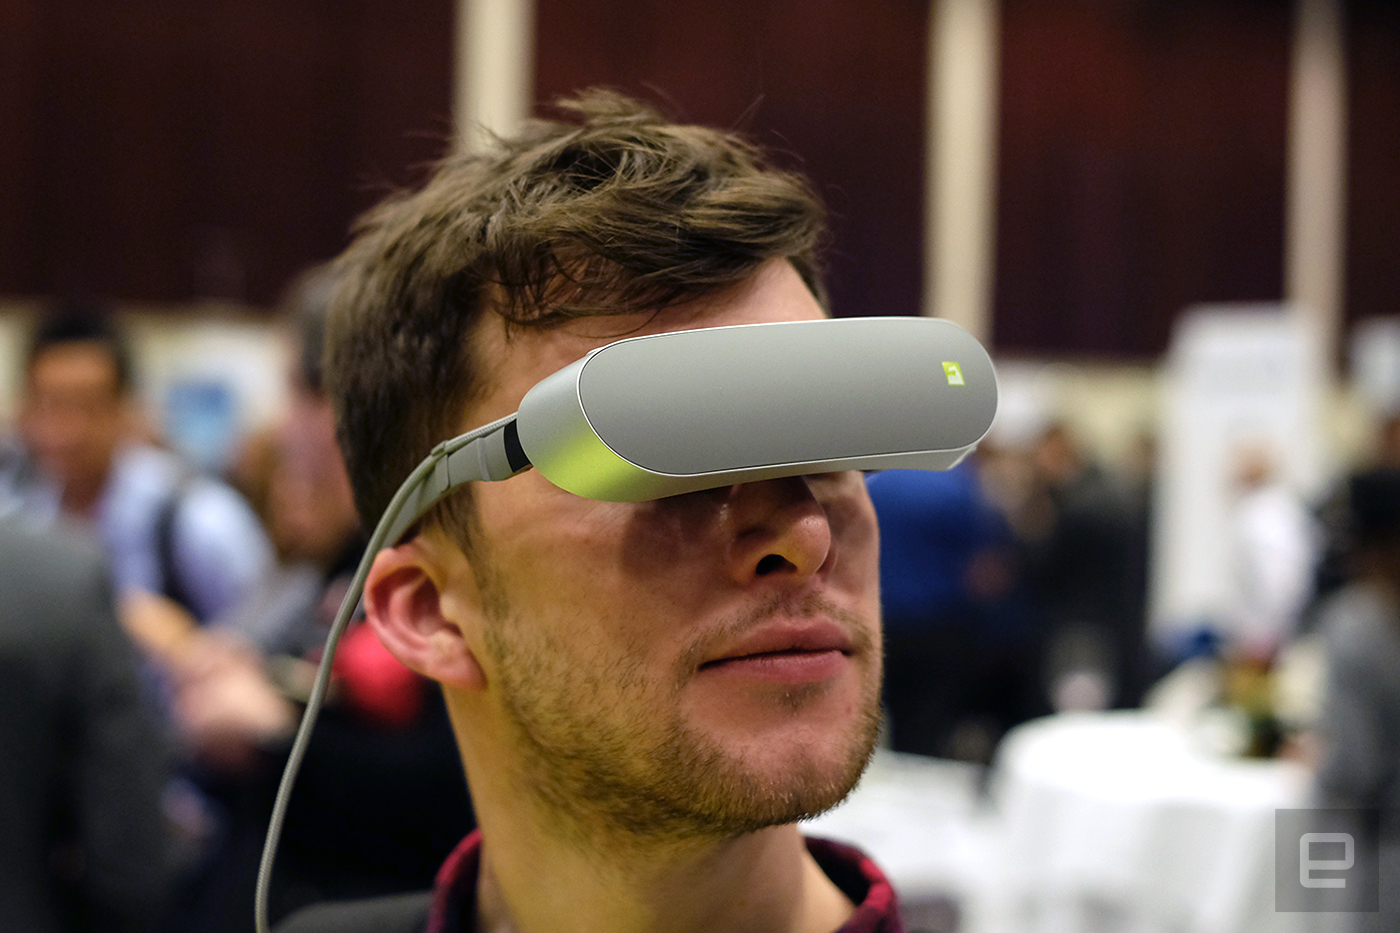 MWC Revisited: Virtual reality is here to stay